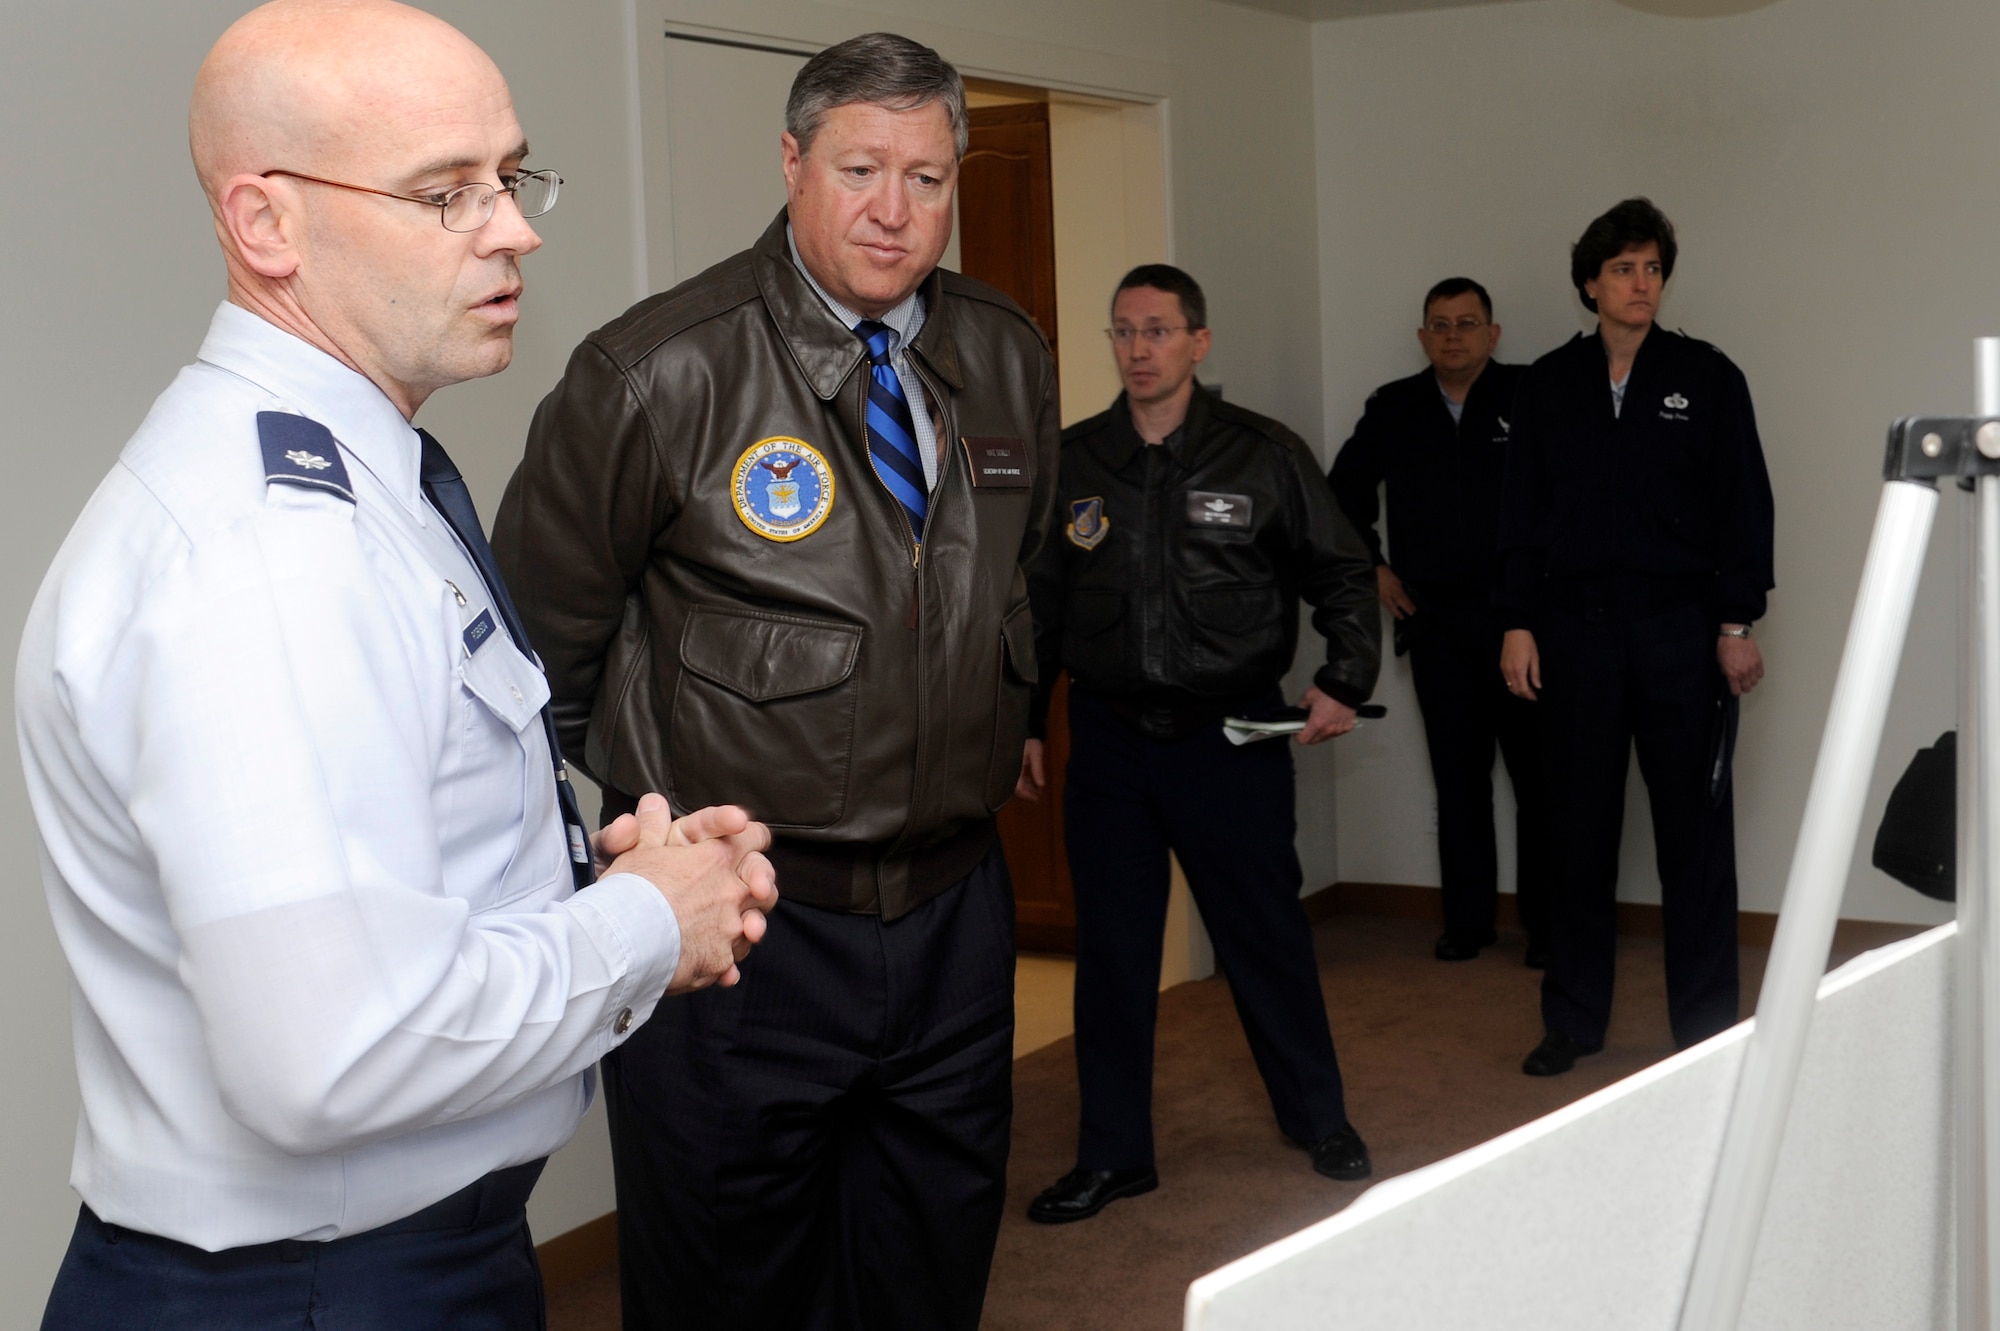 U.S. Air Force Lt. Col. Dwayne Robison, 35th Civil Engineer Squadron commander, briefs Secretary of the Air Force Michael Donley during his visit to Misawa Air Base, Japan, April 23, 2012, on the Post Acquisition Improvement Program. The brief included how the needs of the community are being addressed and how the 35th Fighter Wing is saving Air Force resources. While at Misawa, Donley met with Airmen and toured various base facilities.  (U.S. Air Force photo/Tech. Sgt. Marie Brown/Released)
